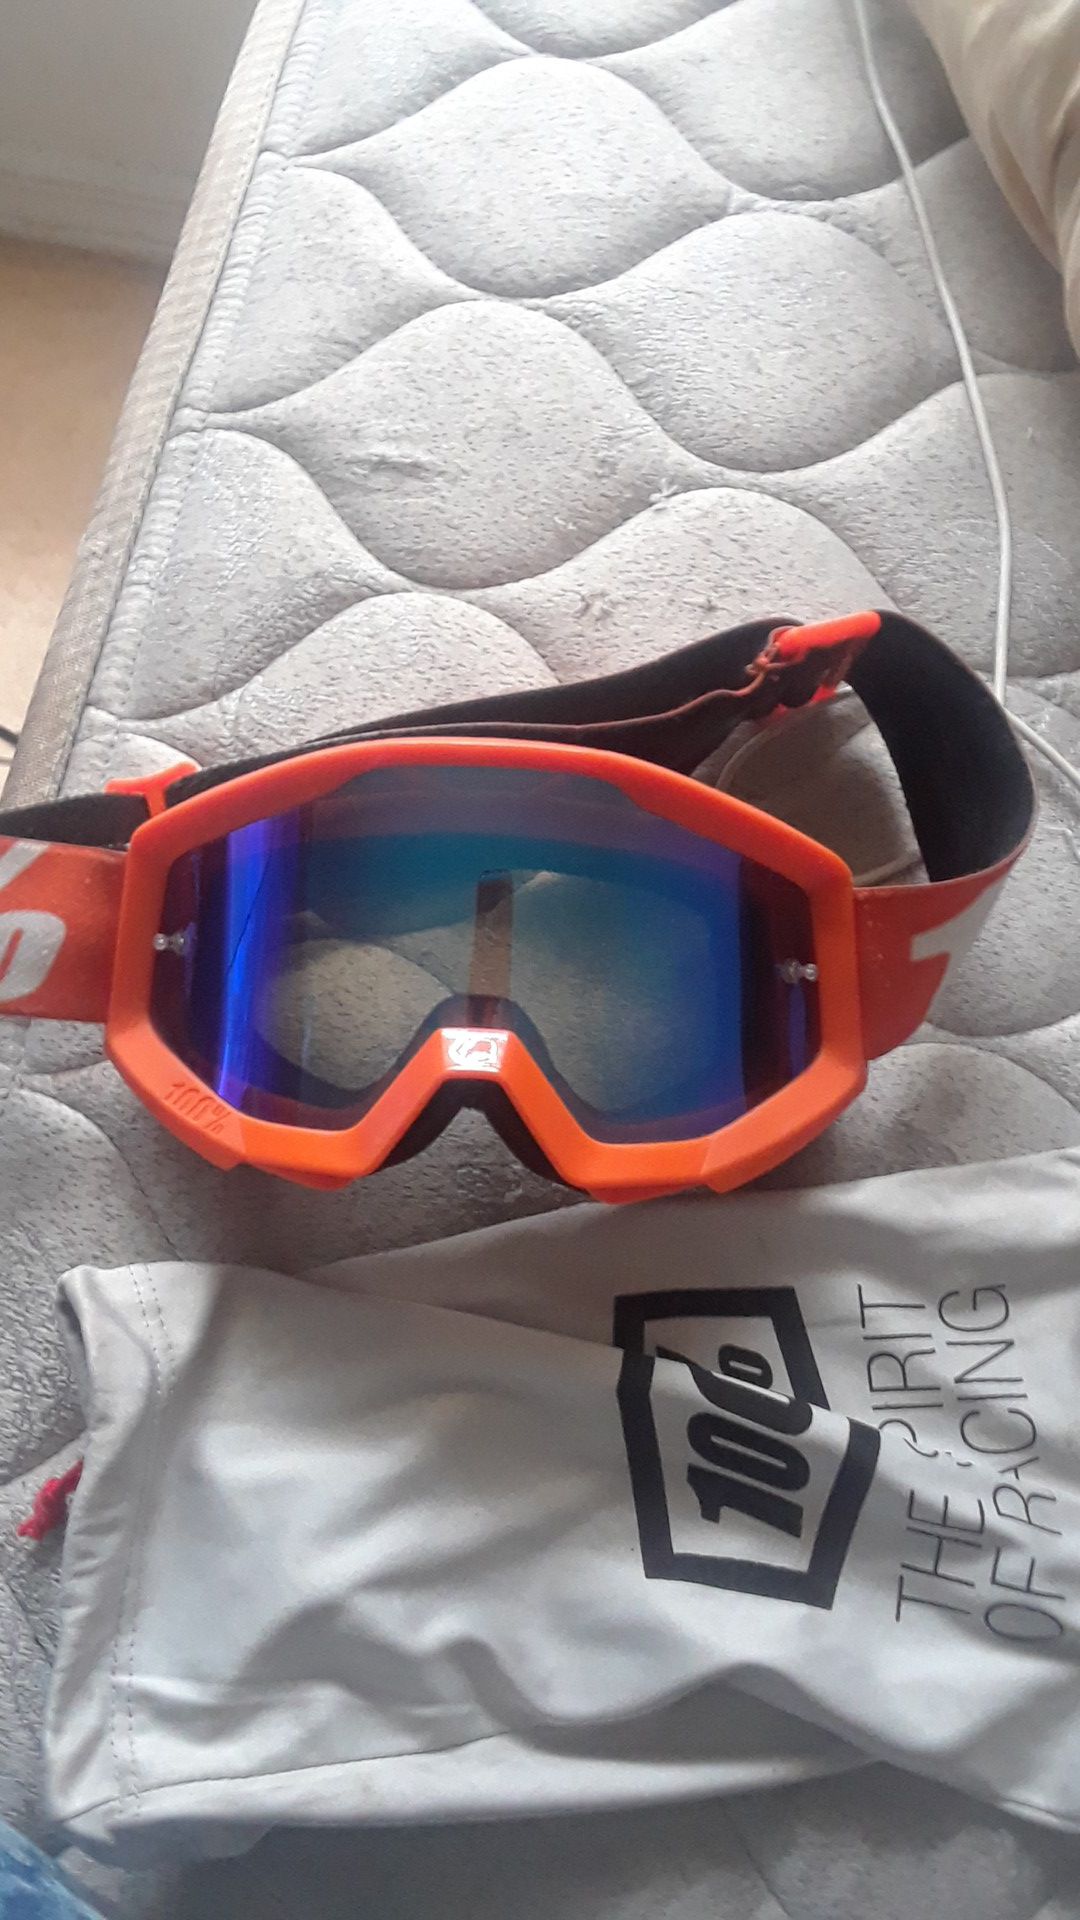 Dirt bike goggles come with dust bag